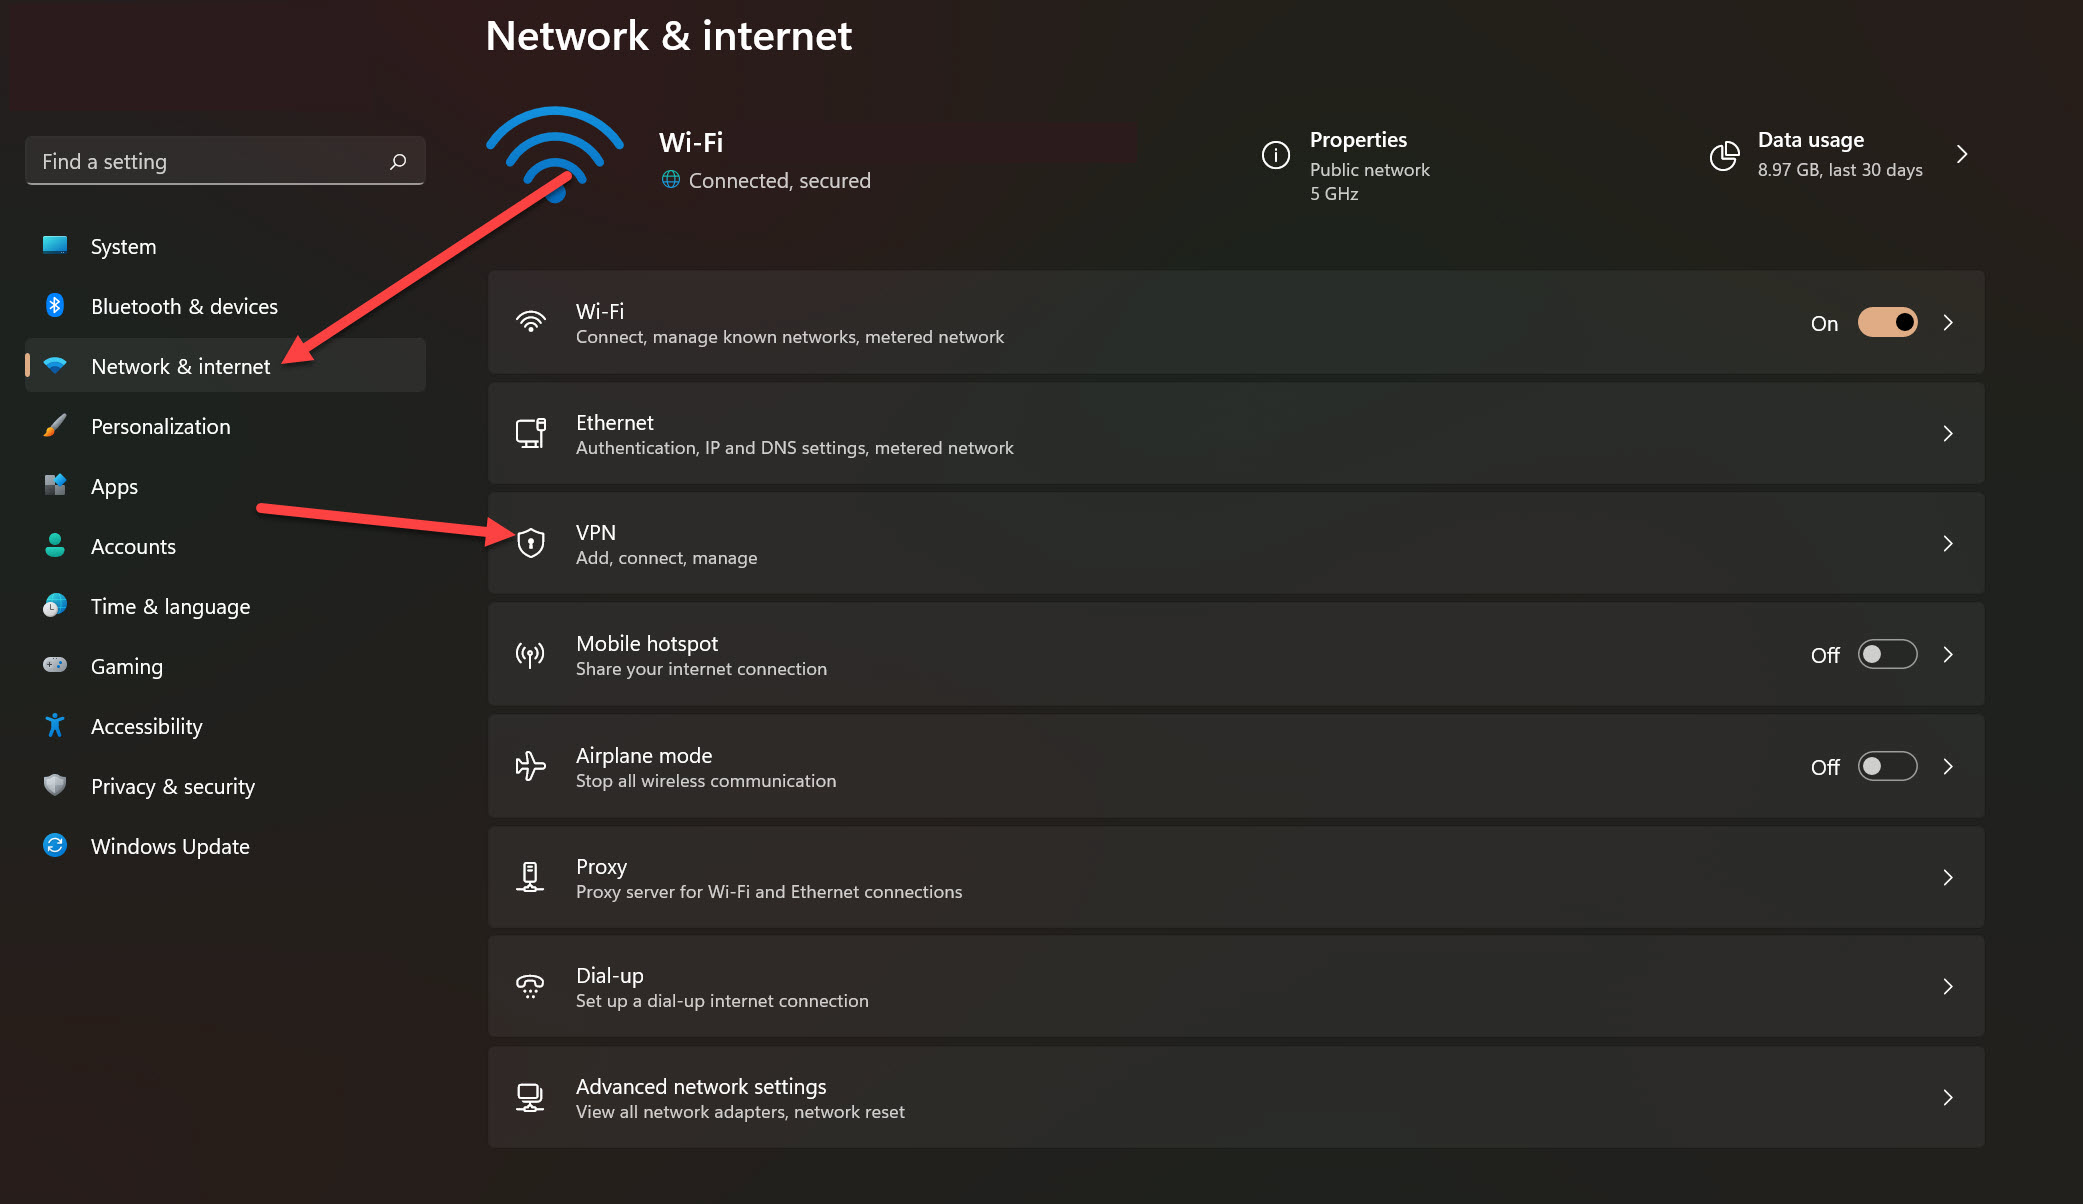 Open VPN settings to disable it